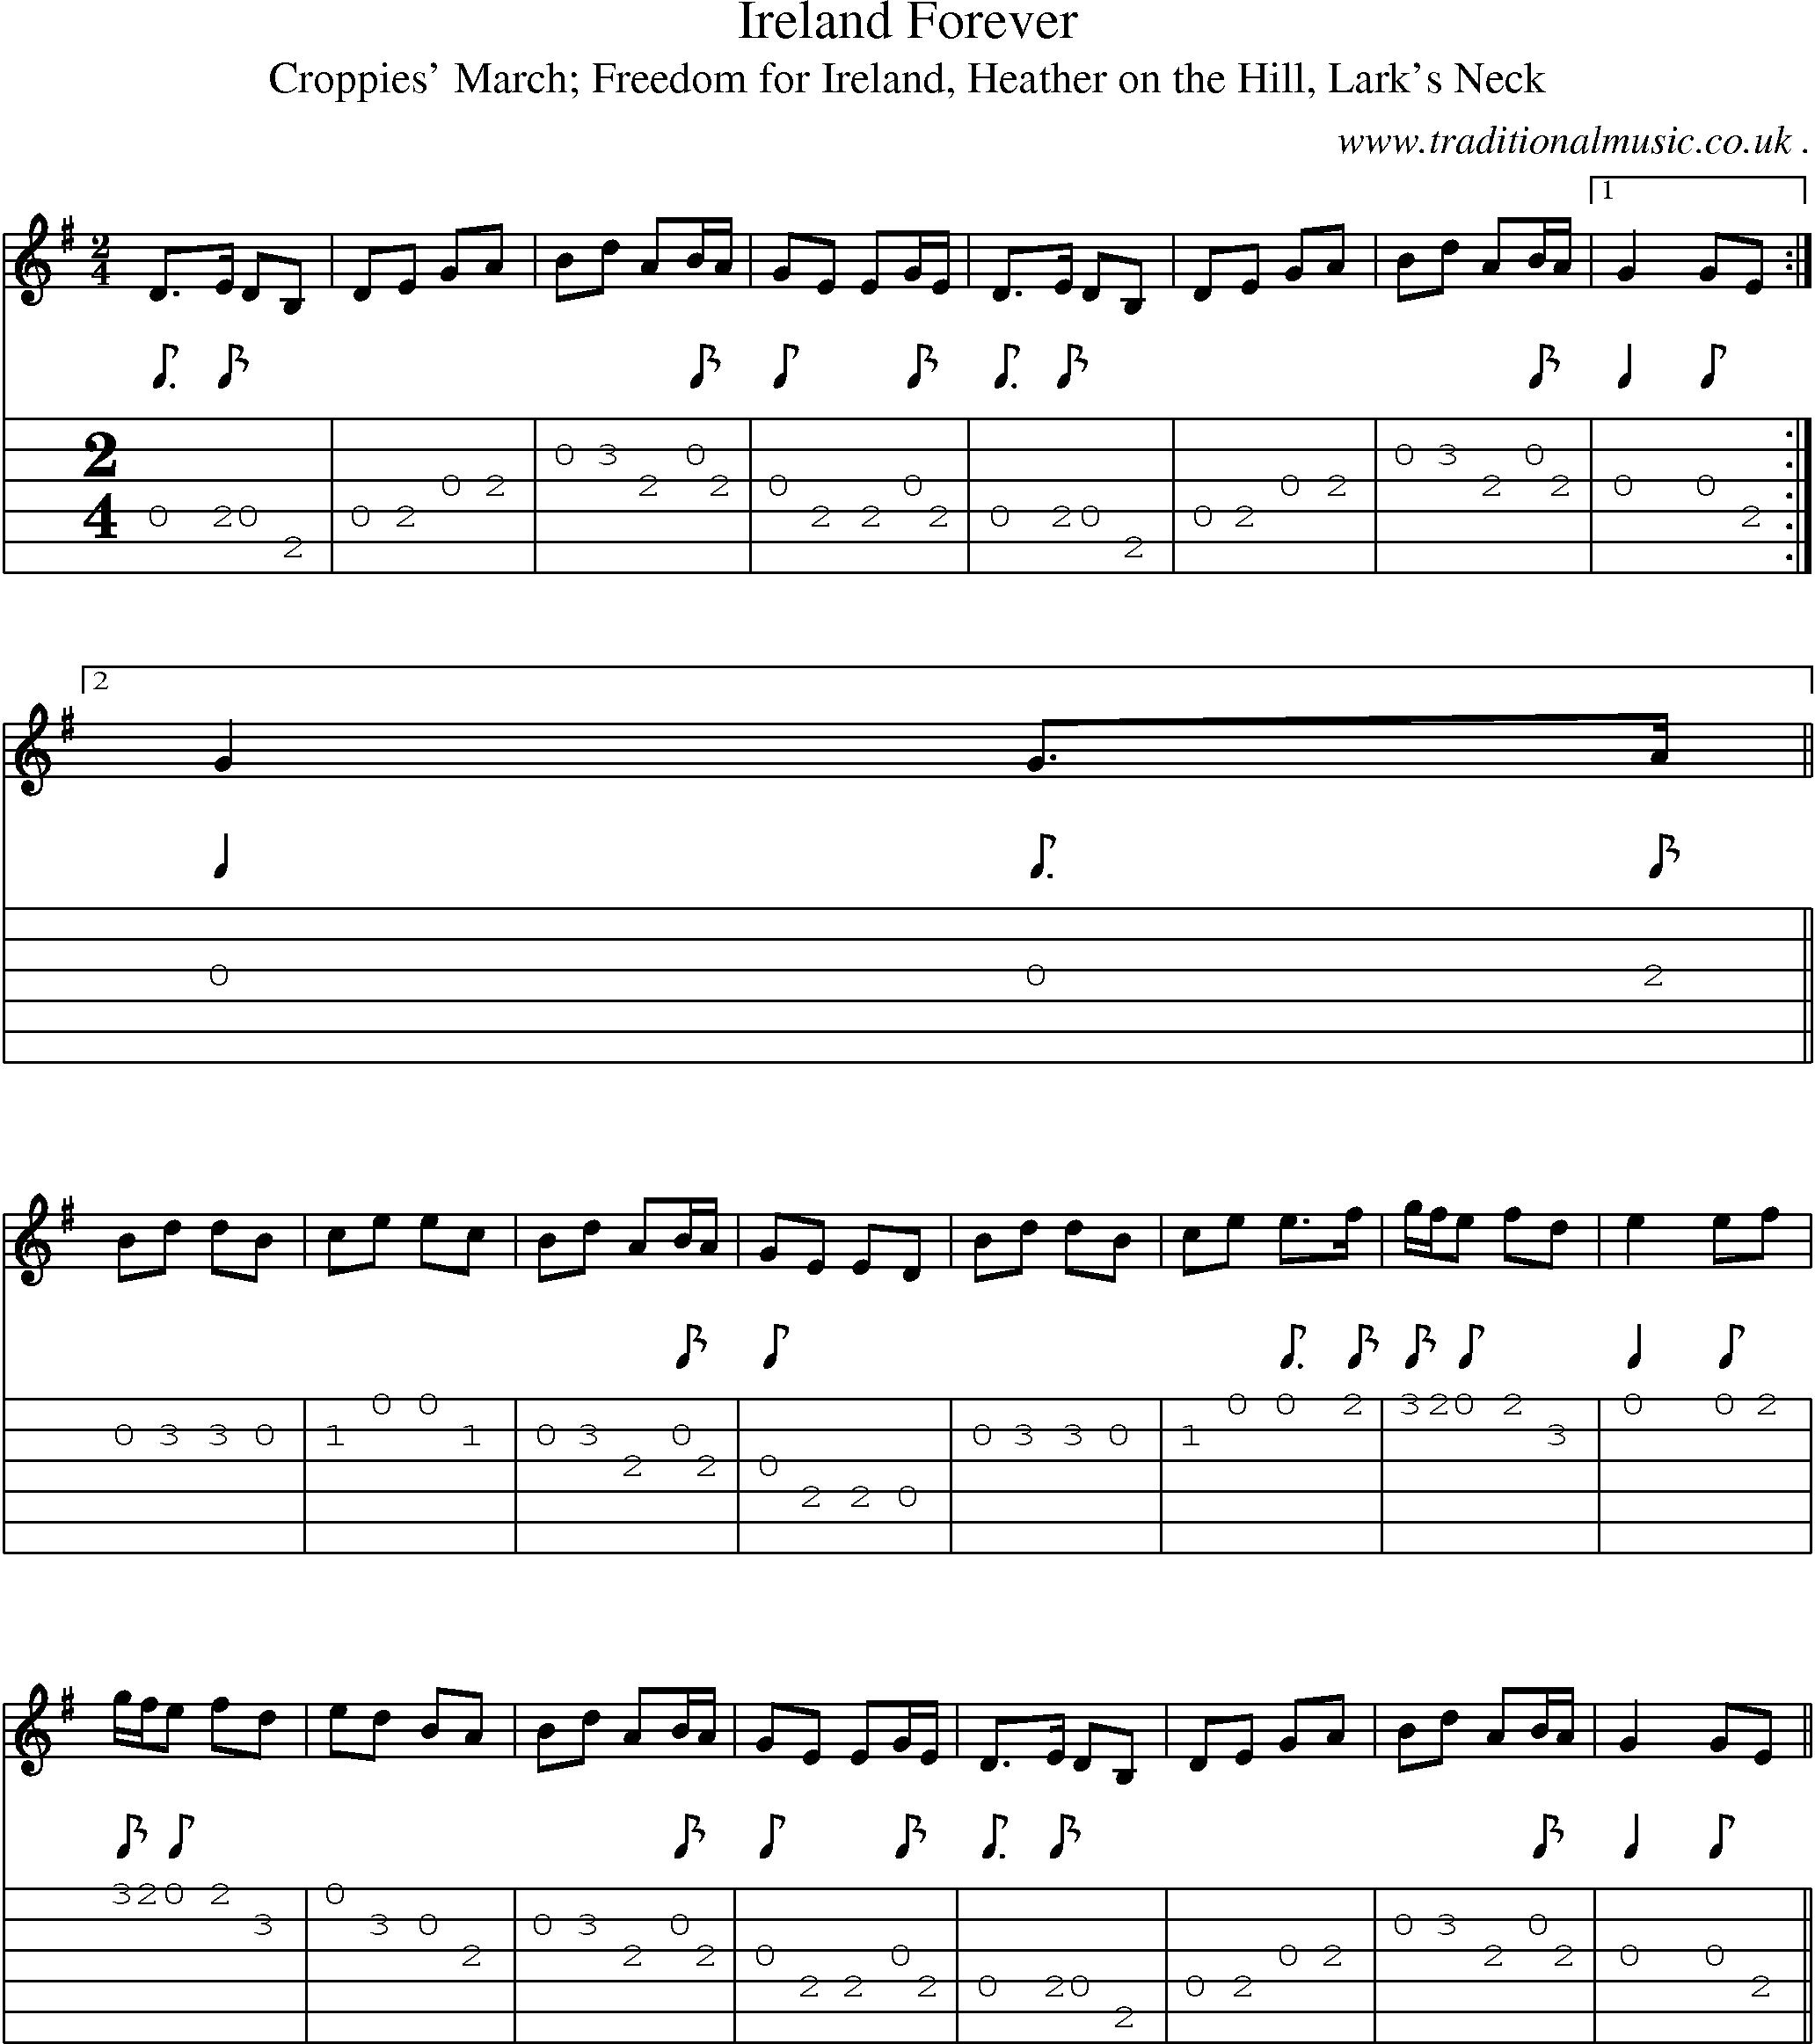 Sheet-Music and Guitar Tabs for Ireland Forever